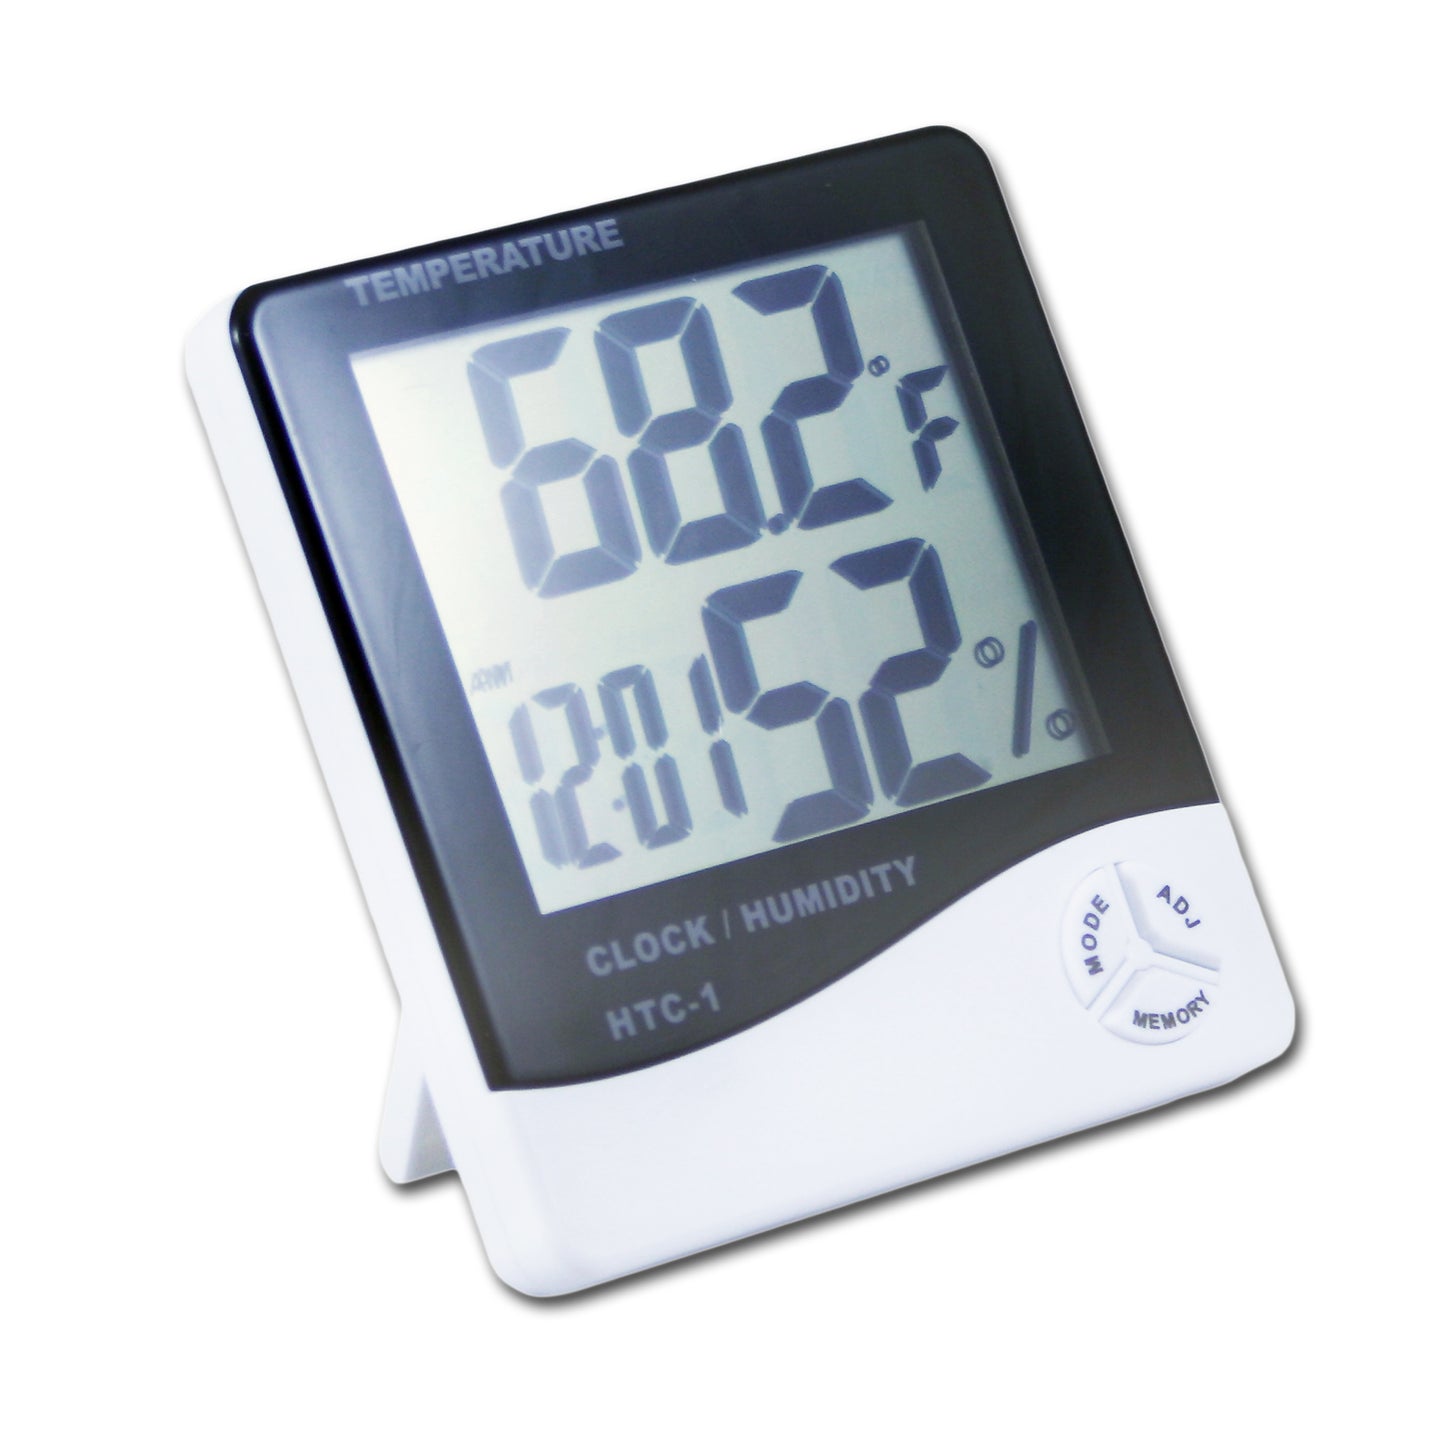 LCD Display Thermometer, Clock, and Hygrometer